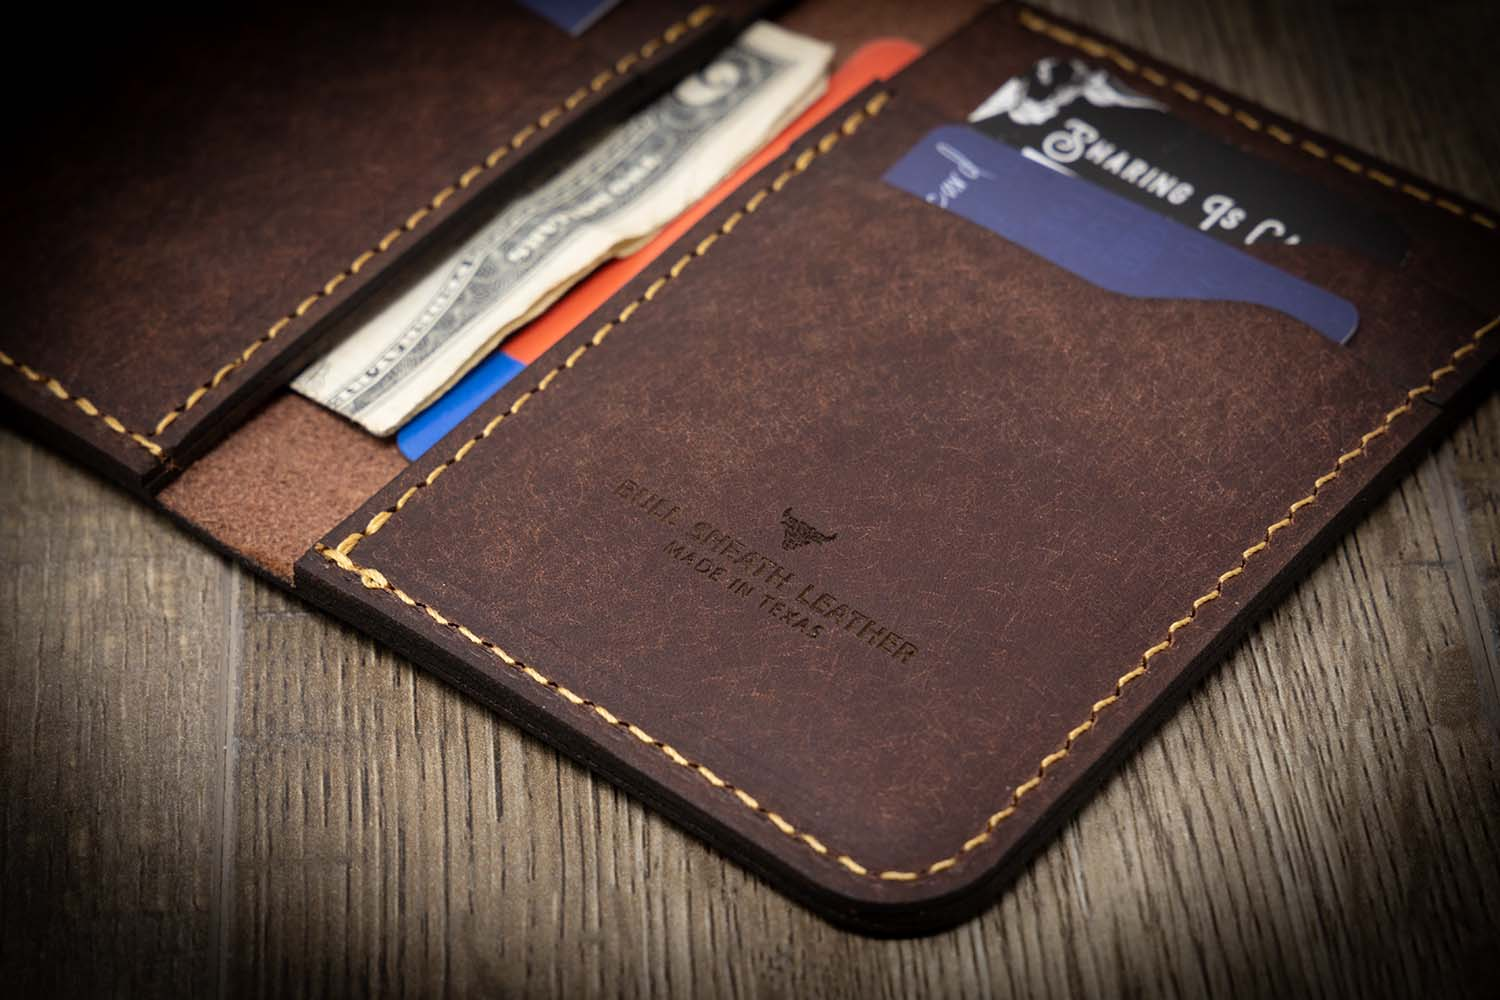 A close-up image of a bifold wallet front pocket made of genuine leather, with multiple card slots and a clear ID window.